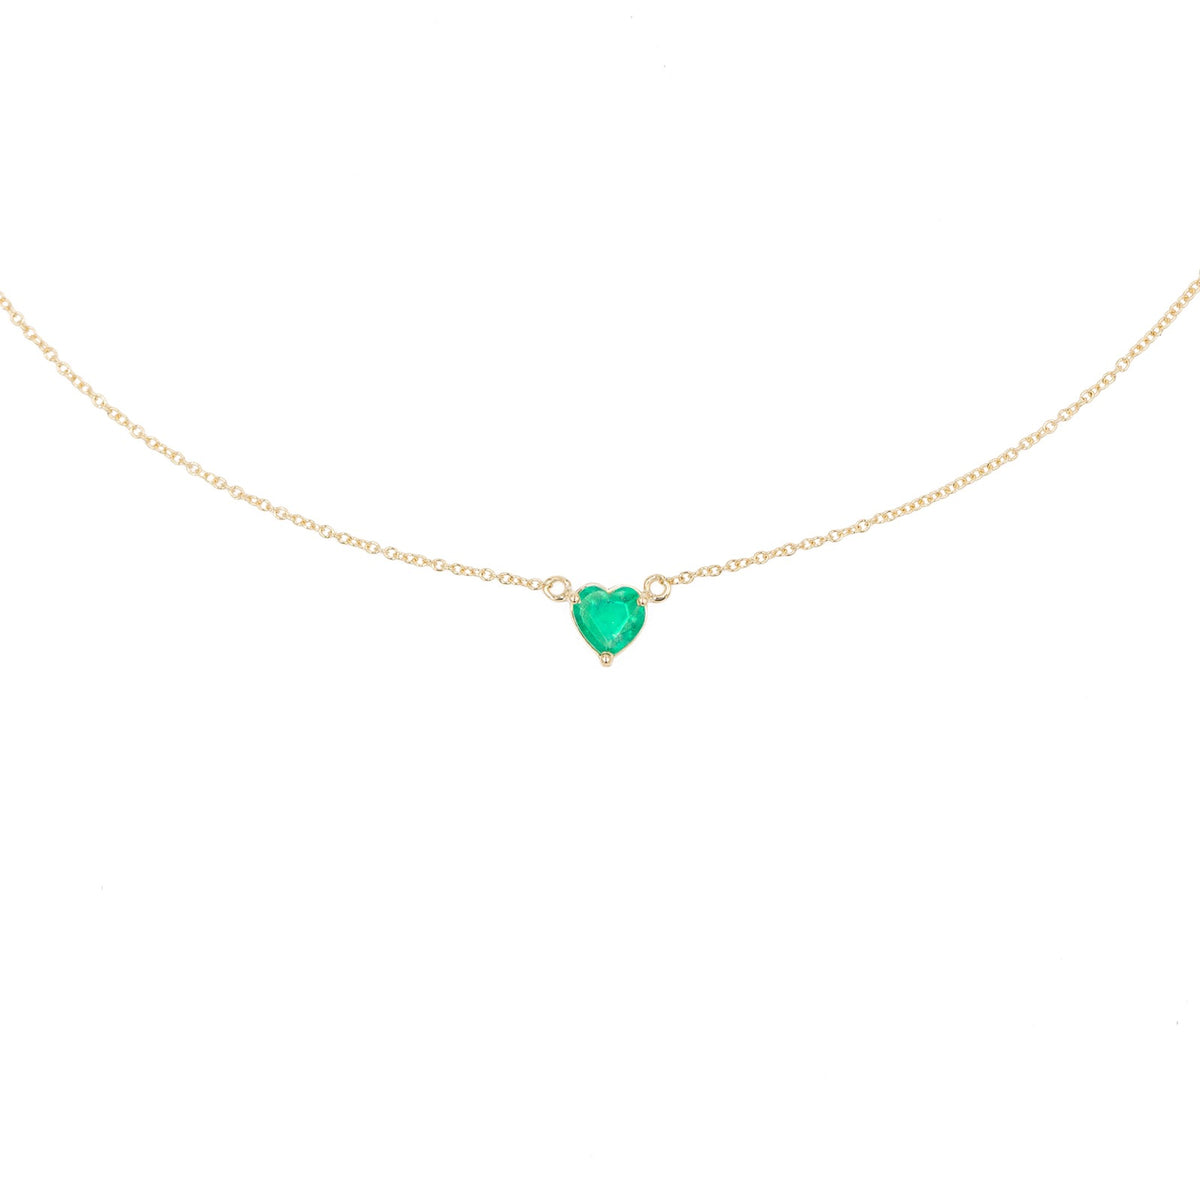 Necklace with heart-cut emerald